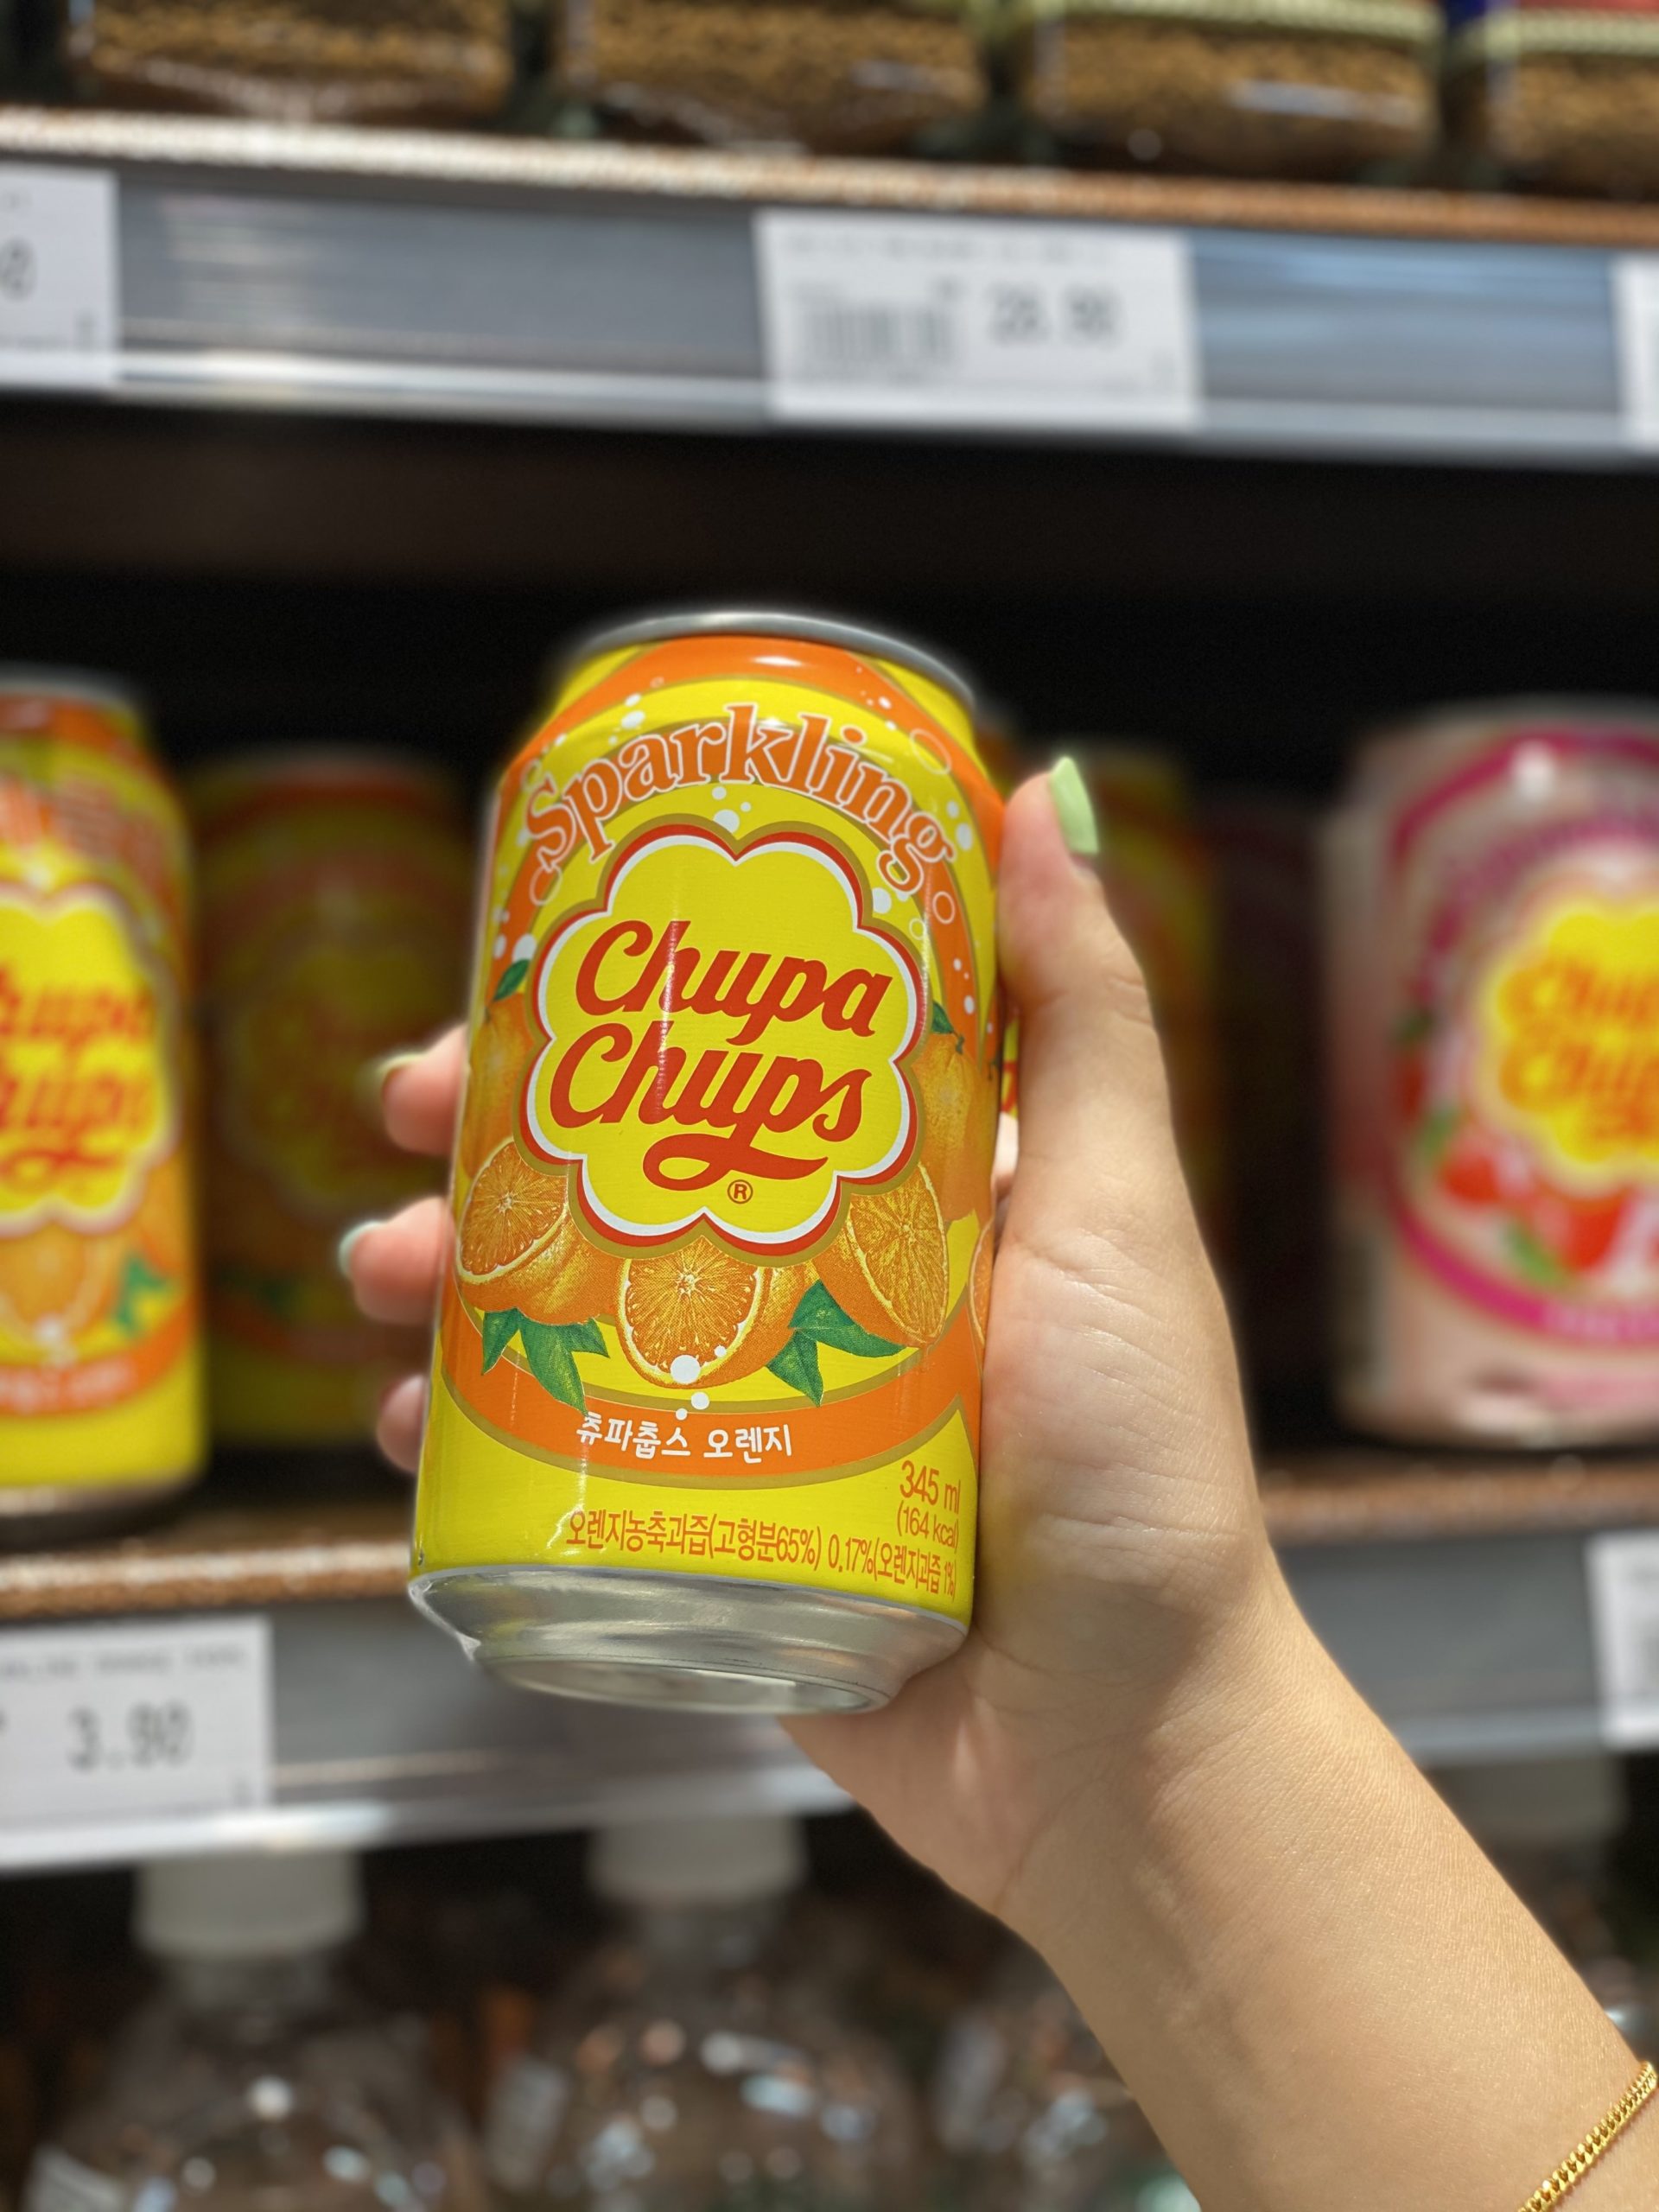 Chupa Chups Sparkling Soda Drinks Spotted In Malaysia - KL Foodie